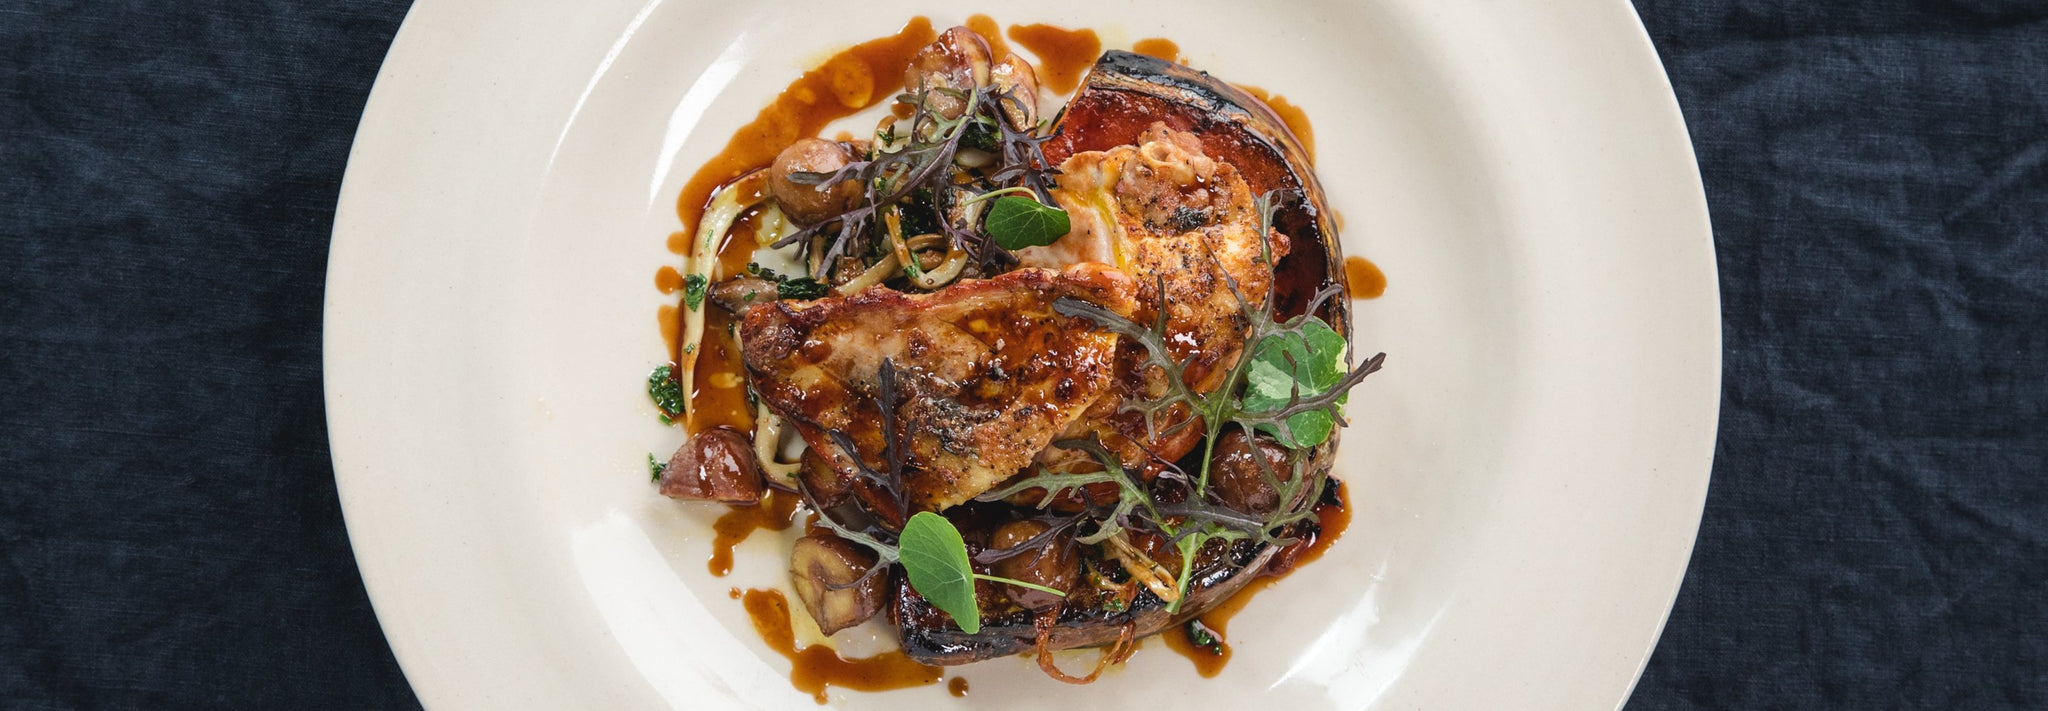 James Golding’s Pheasant Breast with Oyster Mushrooms